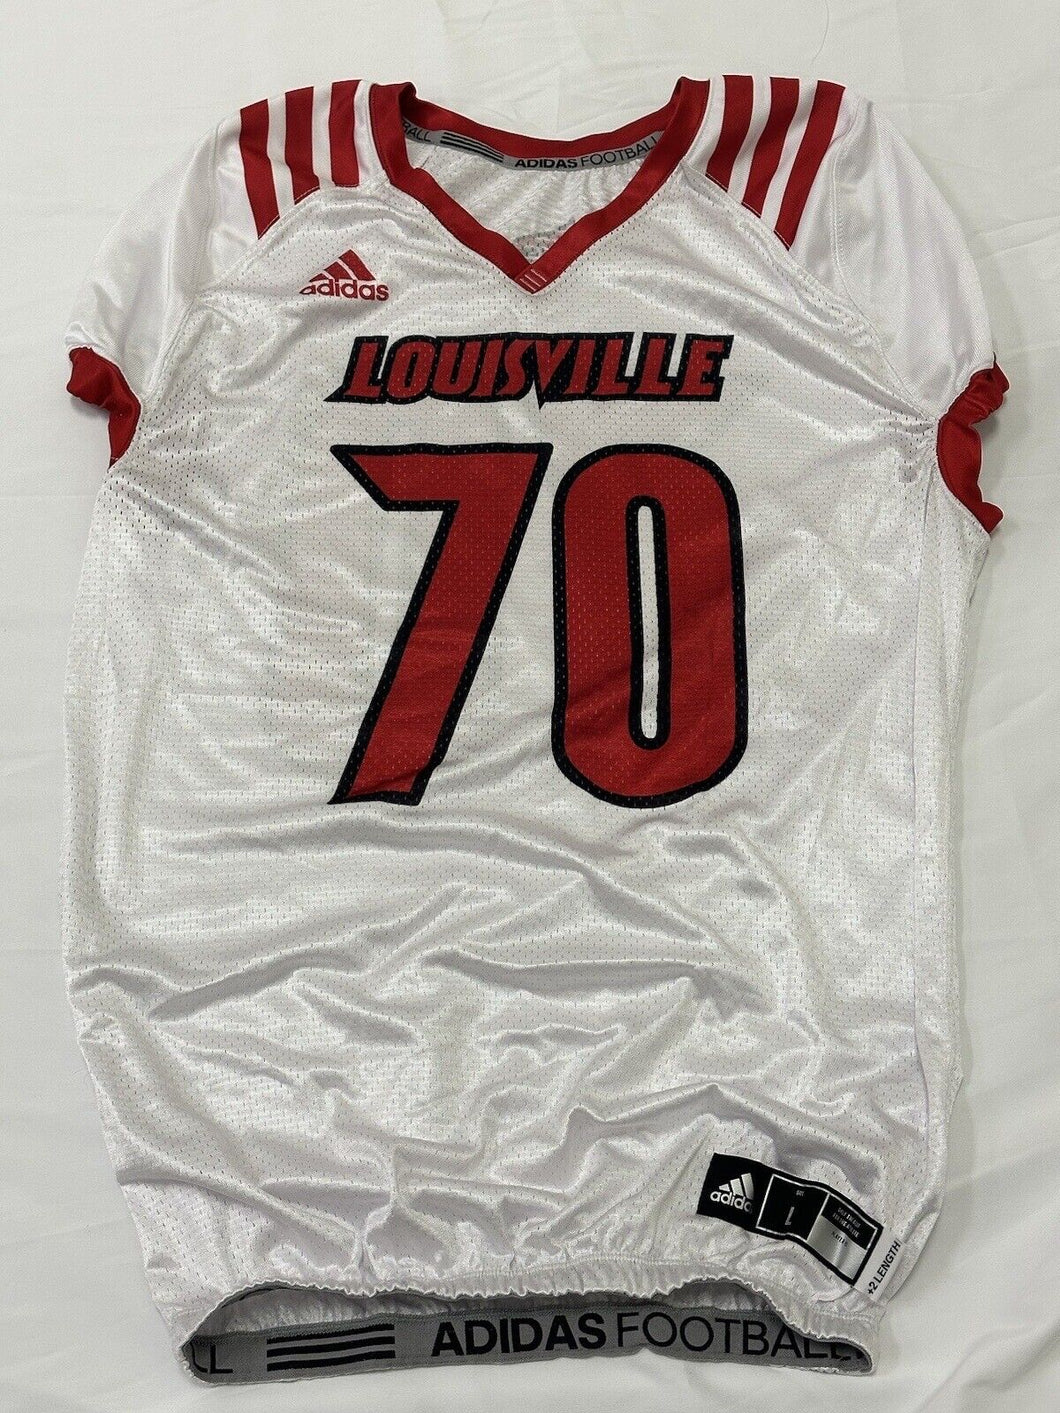 Louisville Cardinals Team Issued Adidas Practice Football Jersey - #70 Large LT